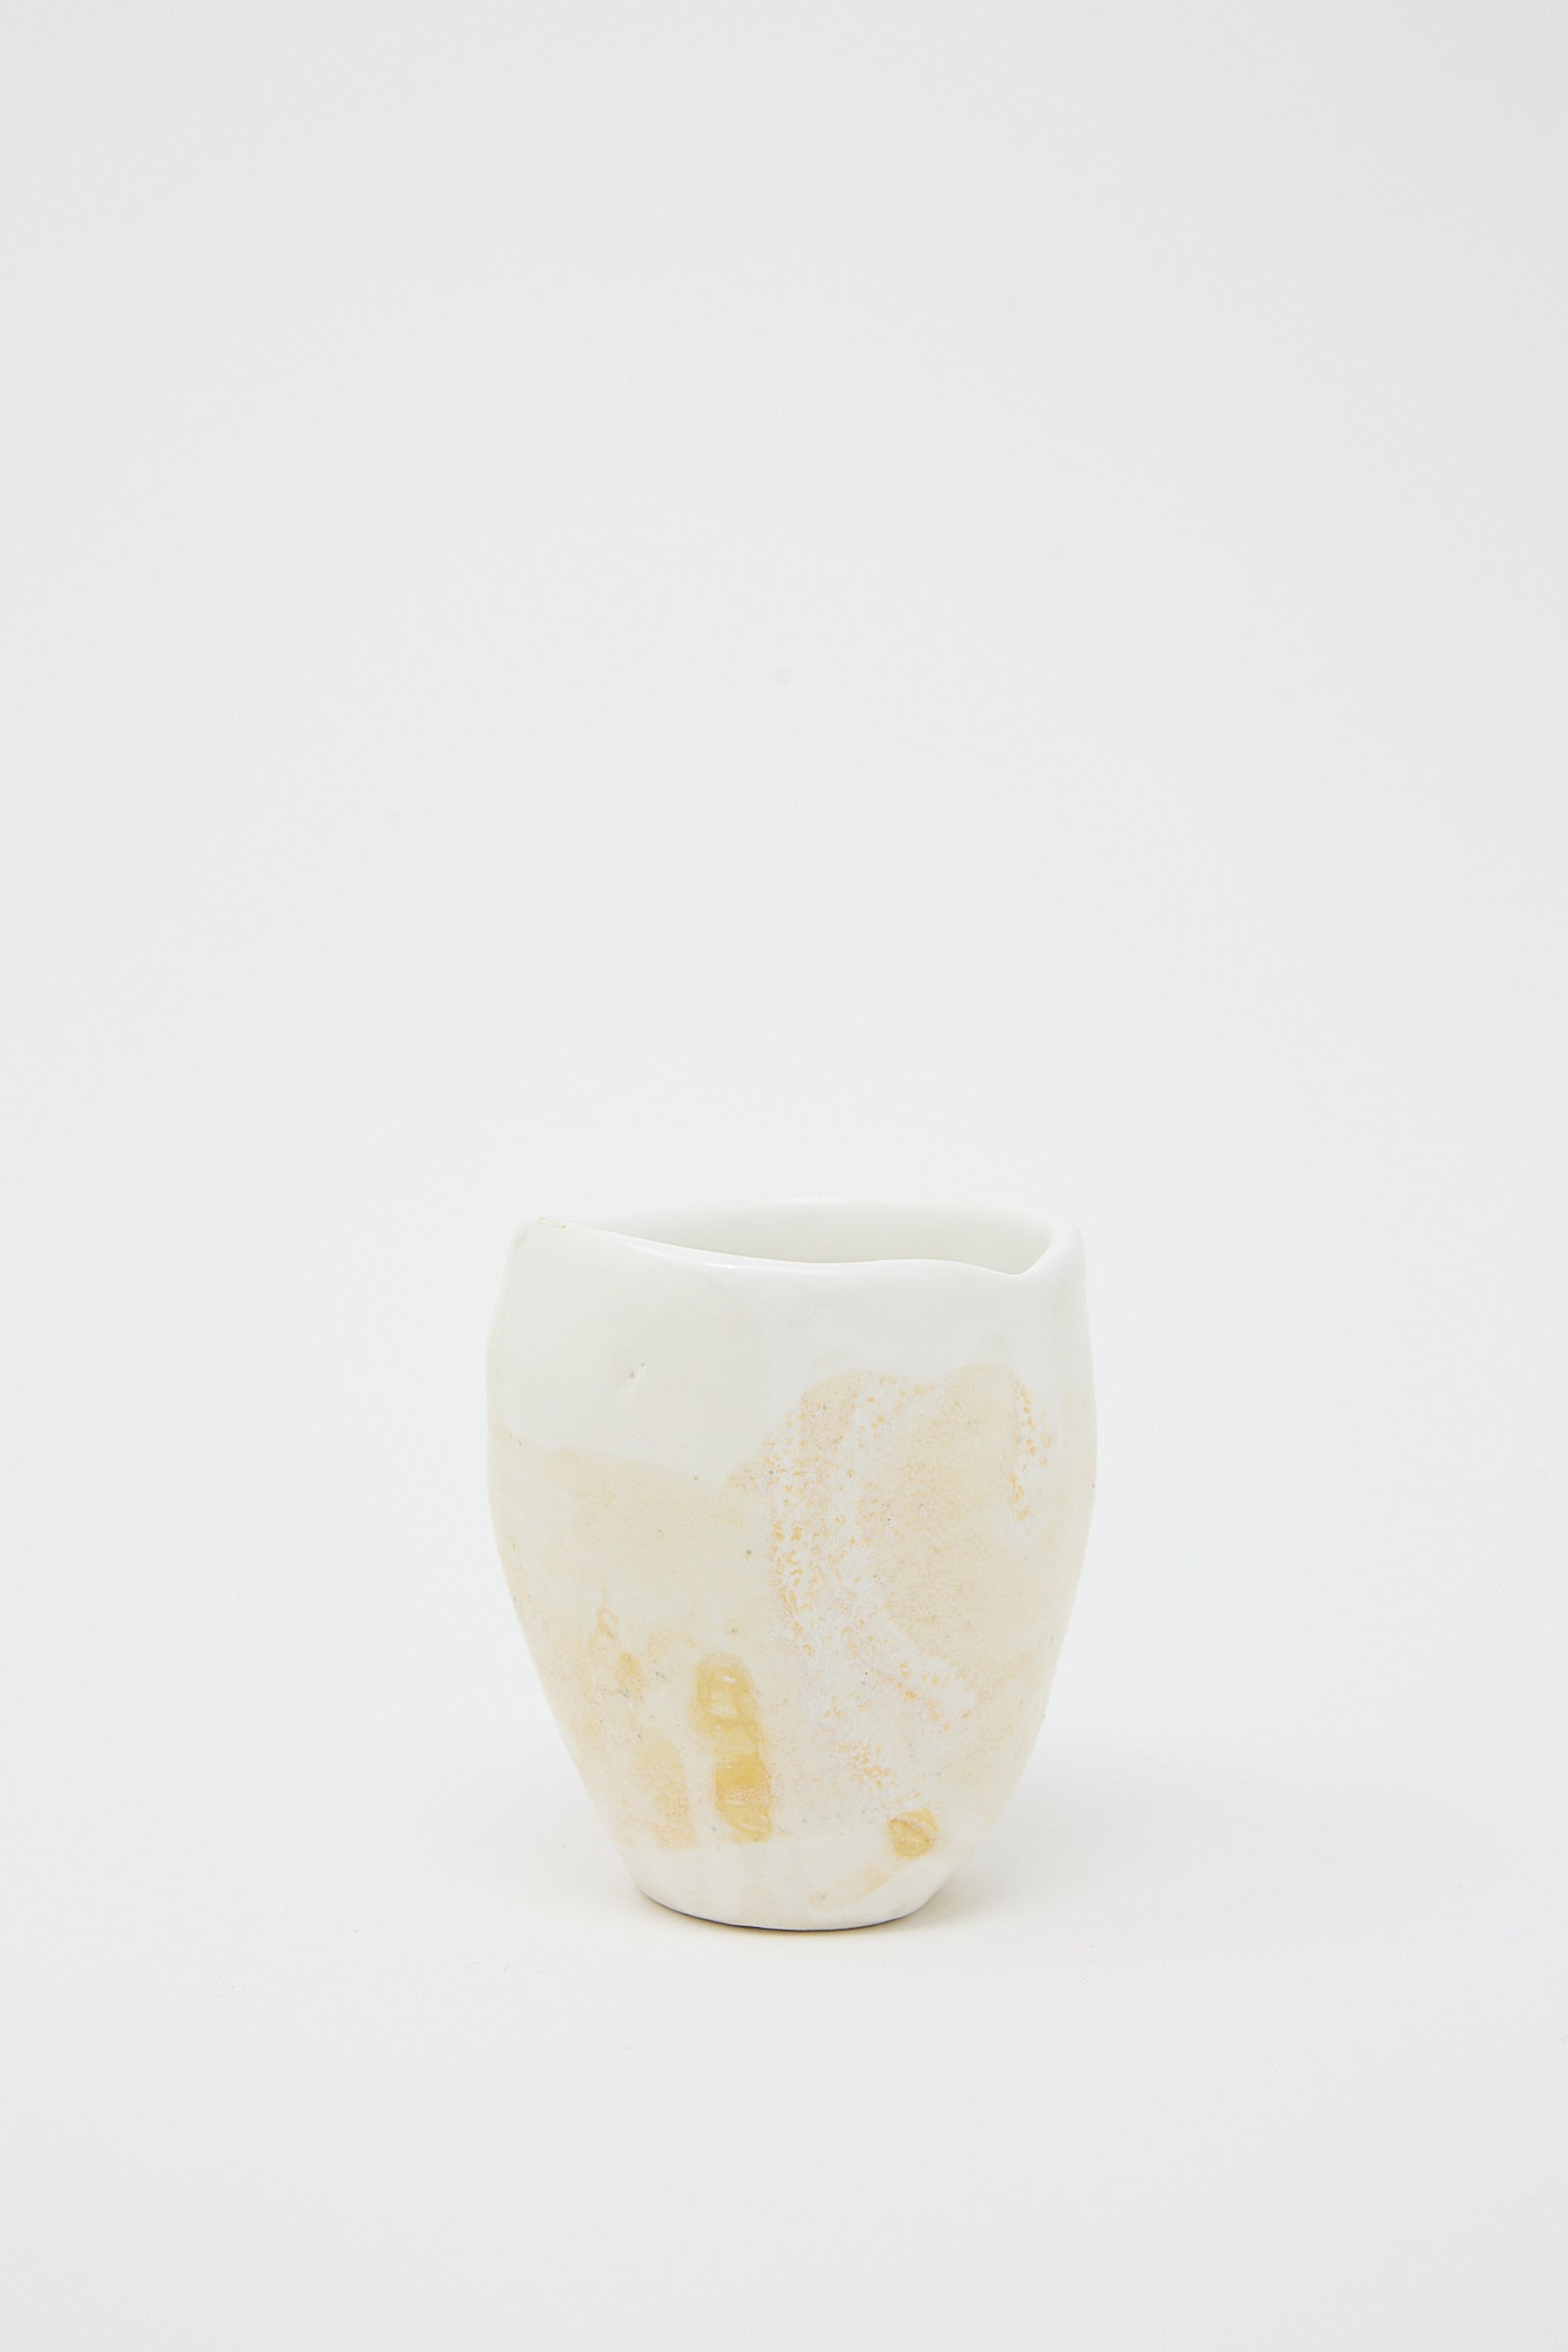 A MONDAYS white hand-built Porcelain Tumbler in Beige and White with a textured glaze on a white background.